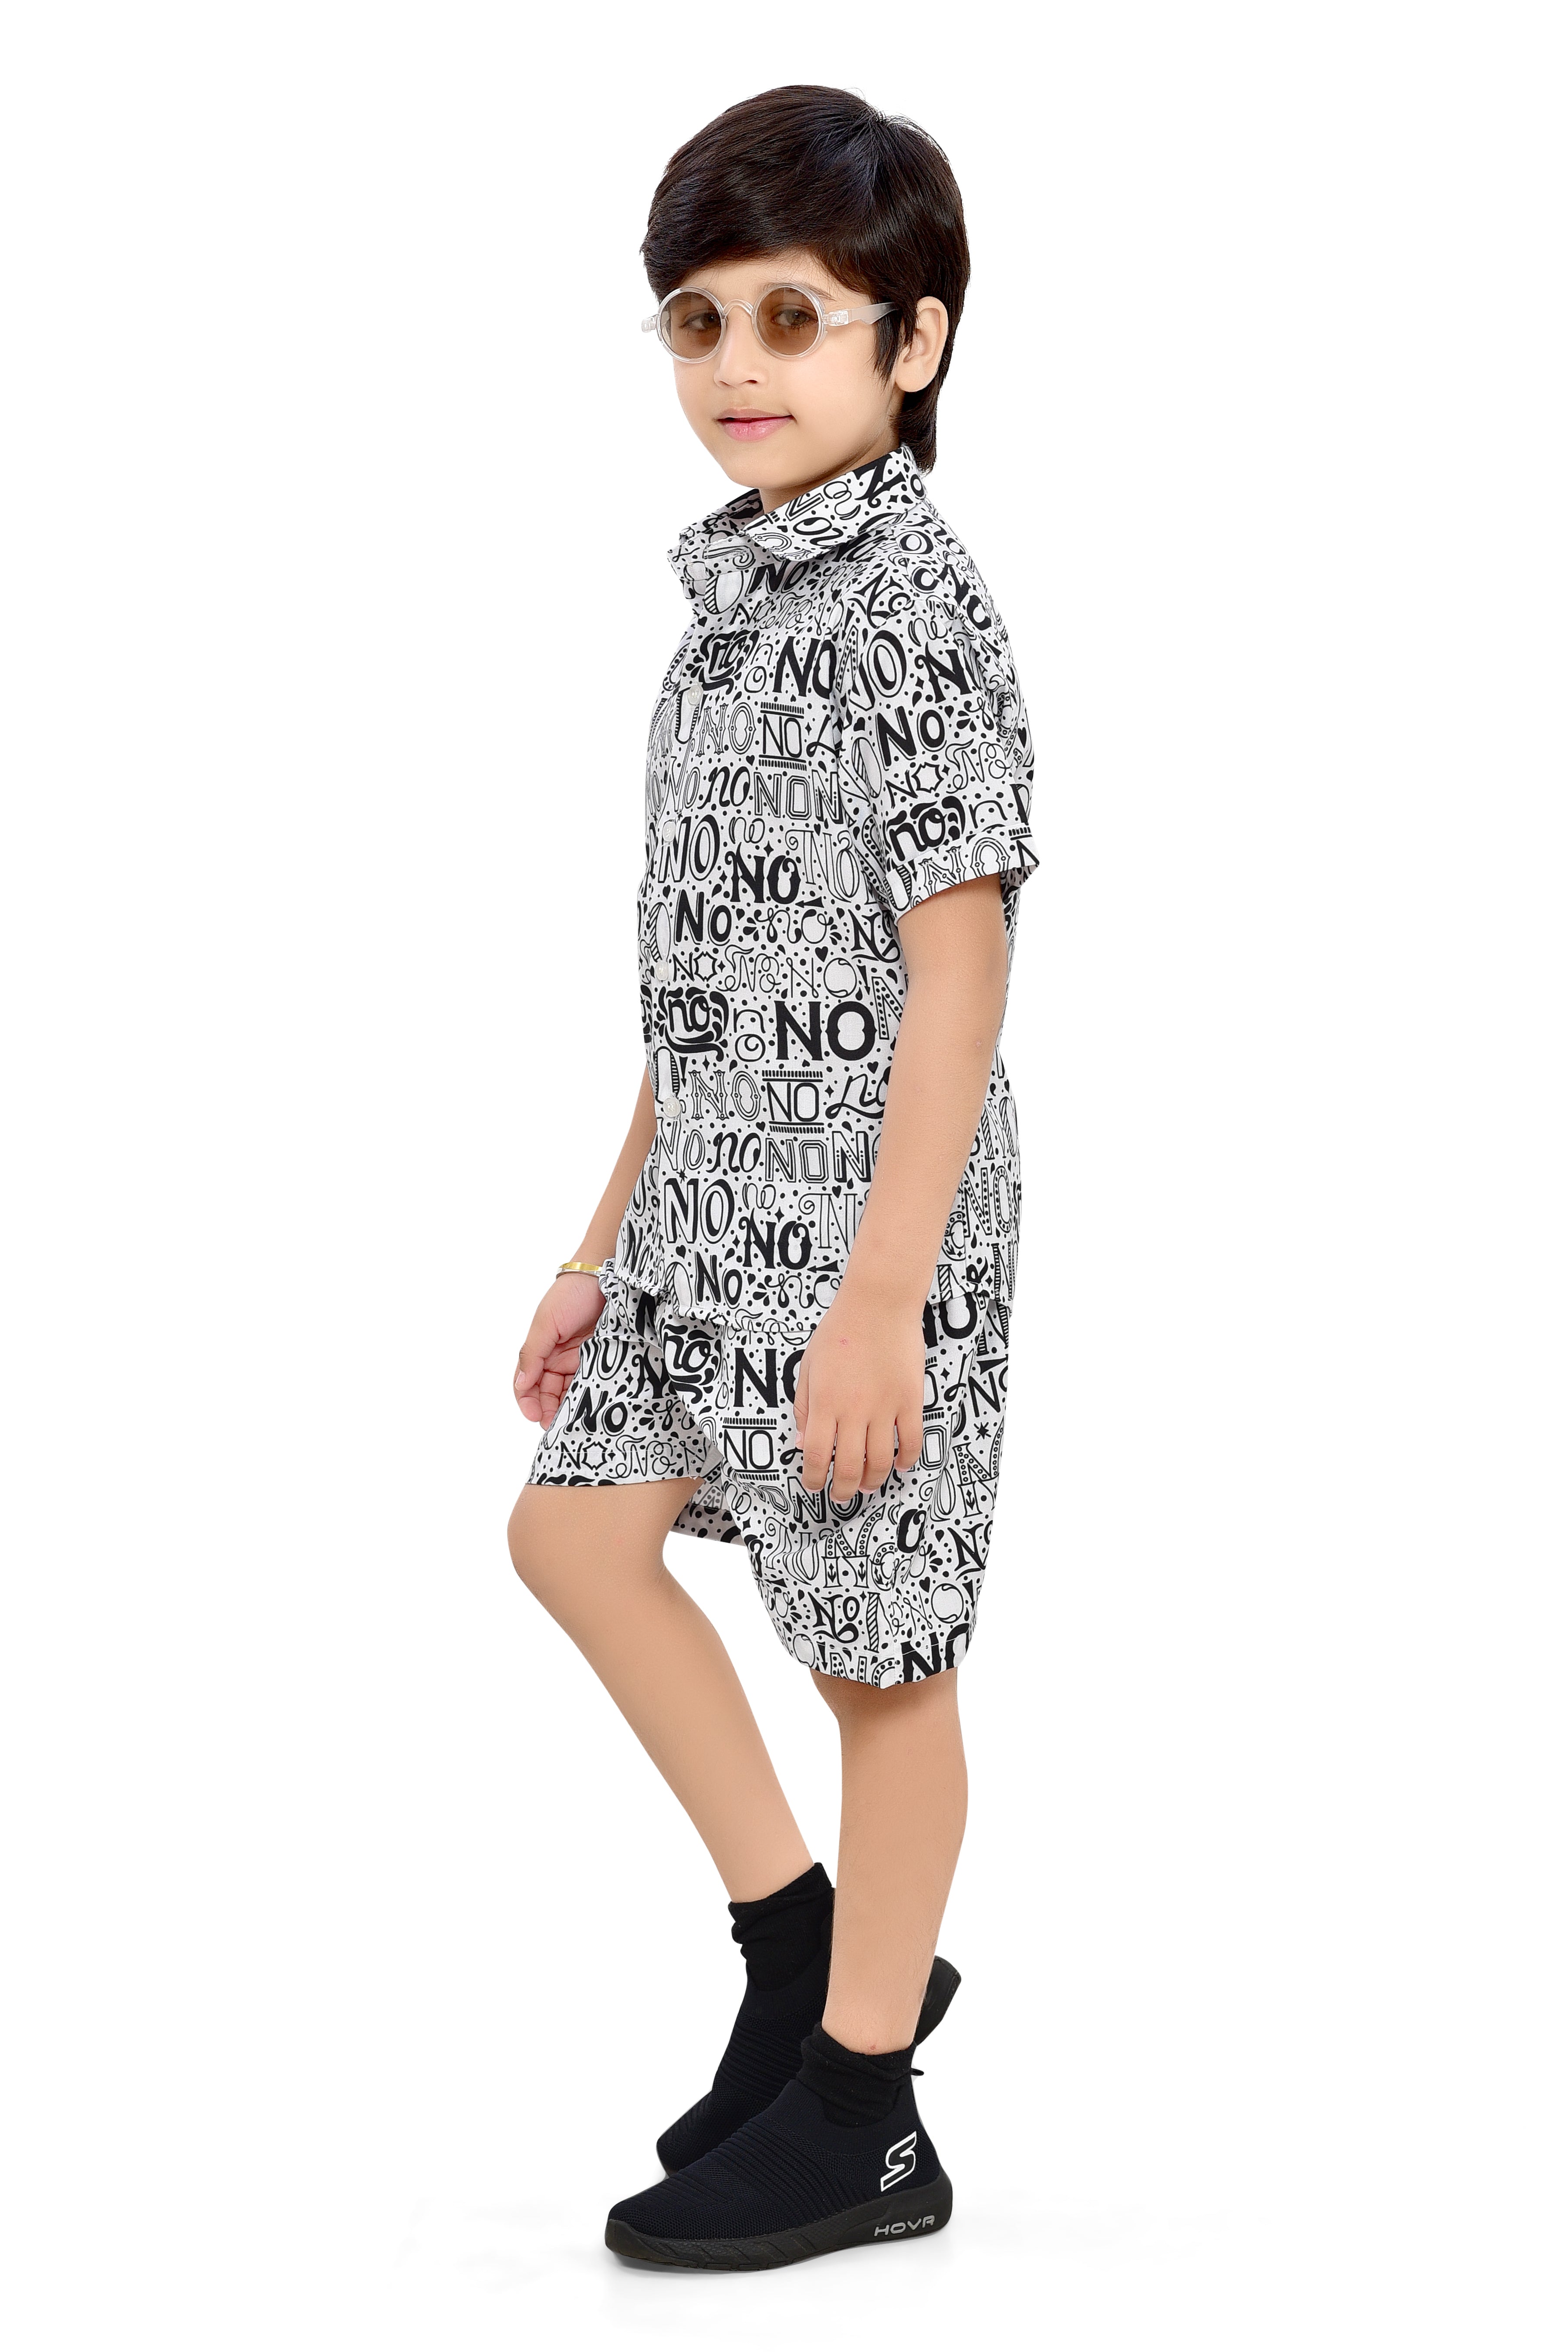 The Root & Craft Cotton Kids Birthday Photoshoot Outfit Dress (12 Month- Black & White) (12 month) : Amazon.in: Clothing & Accessories